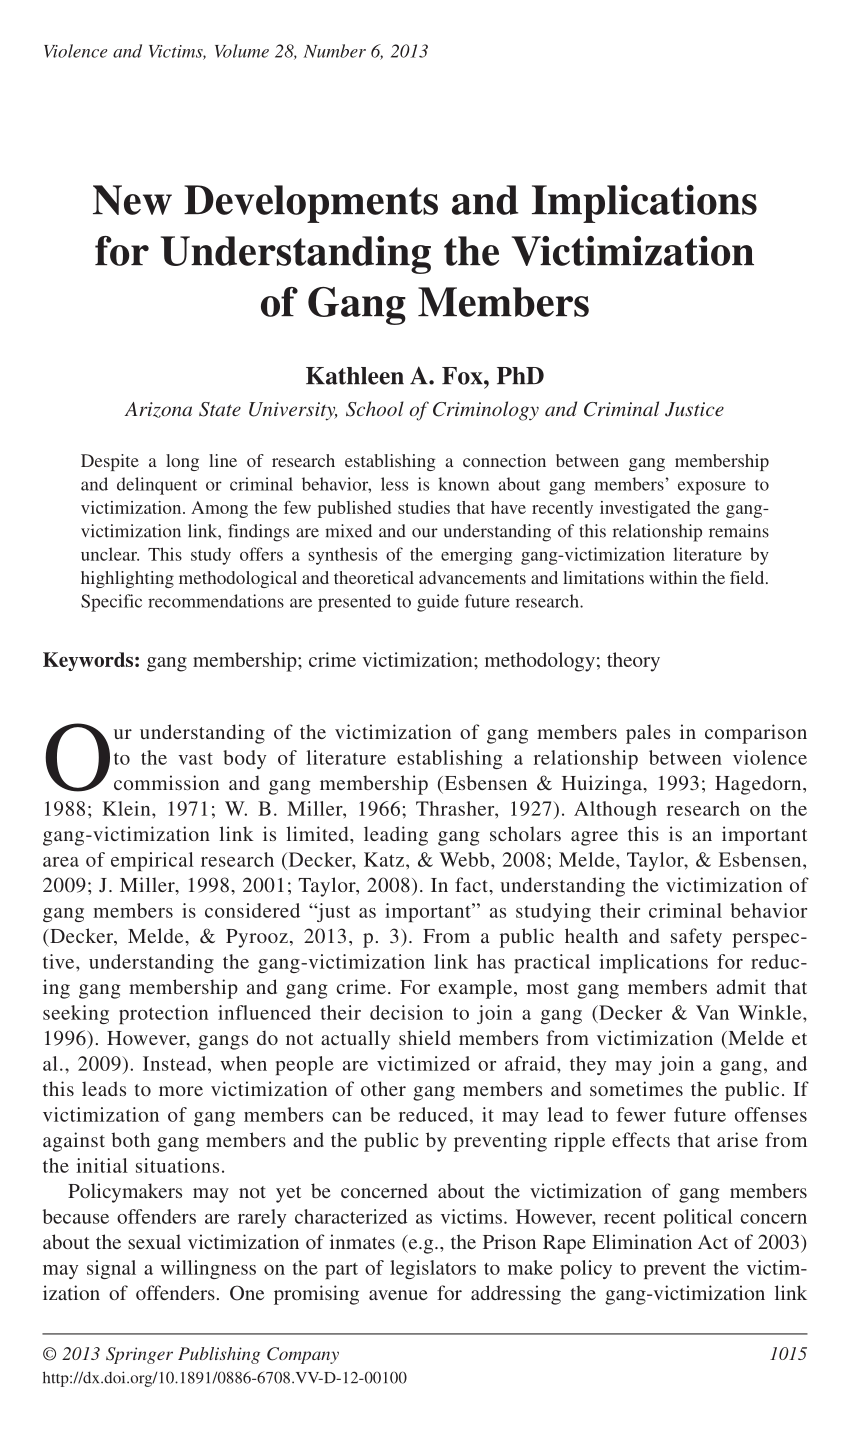 research articles about gangs